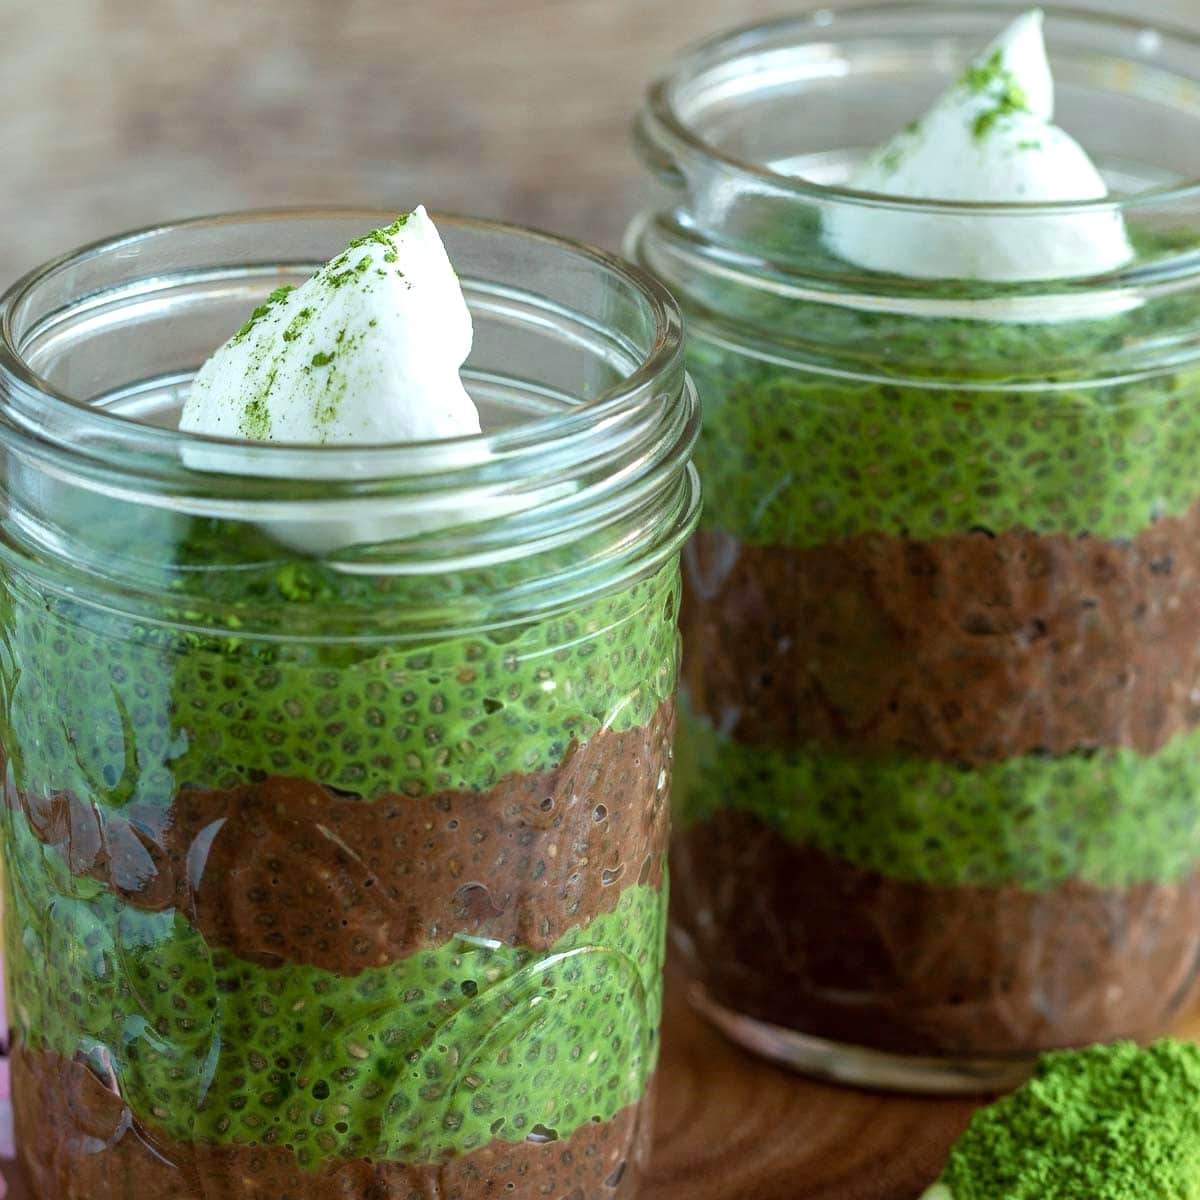 Chocolate and matcha chia seed puddings in mason jars with a scoop of matcha green tea powder.